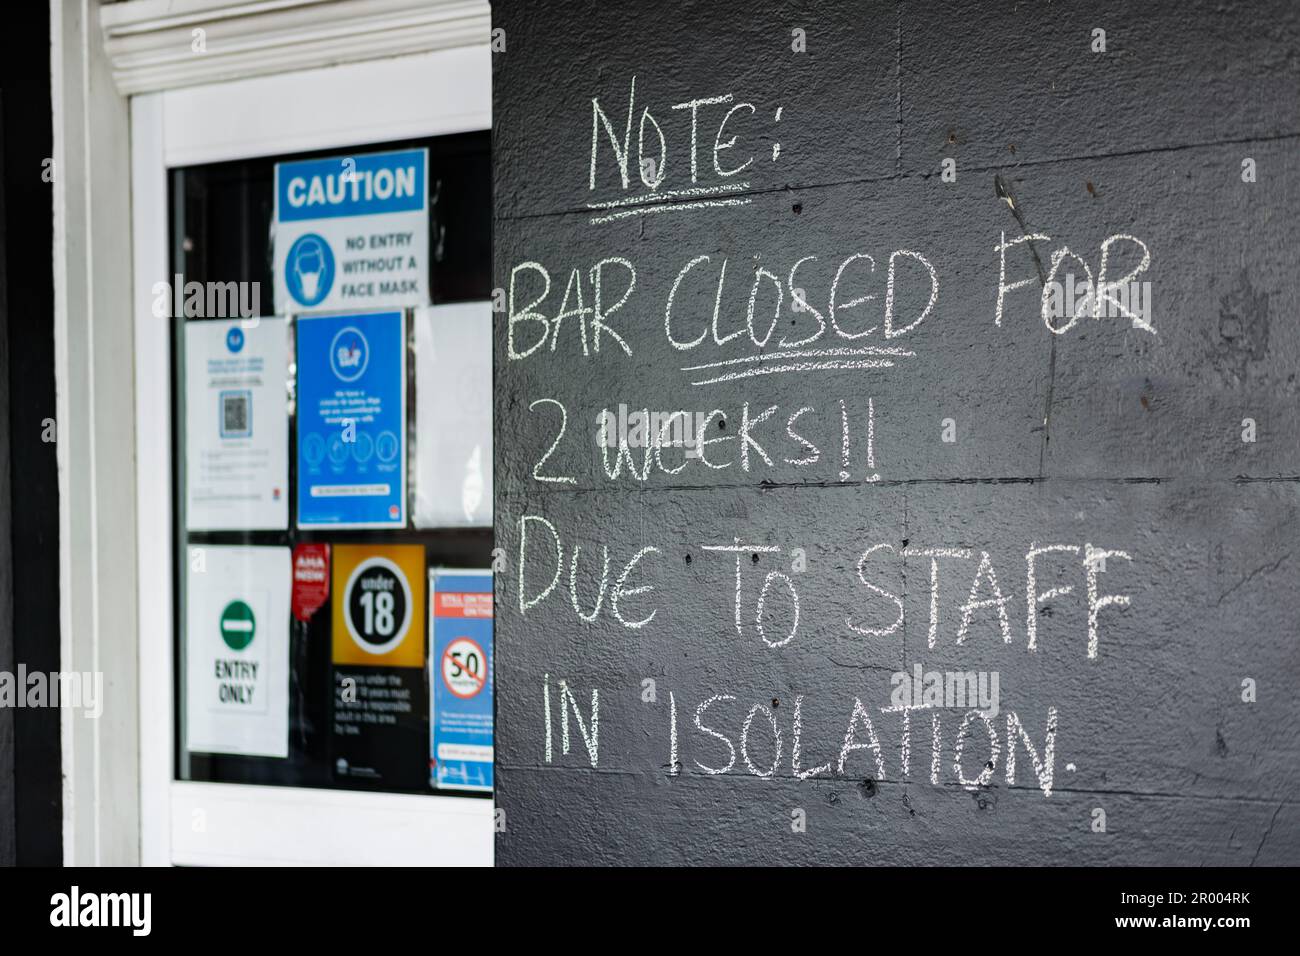 chalk writing on wall of pub building Note: bar closed for 2 weeks due to staff in isolation Stock Photo